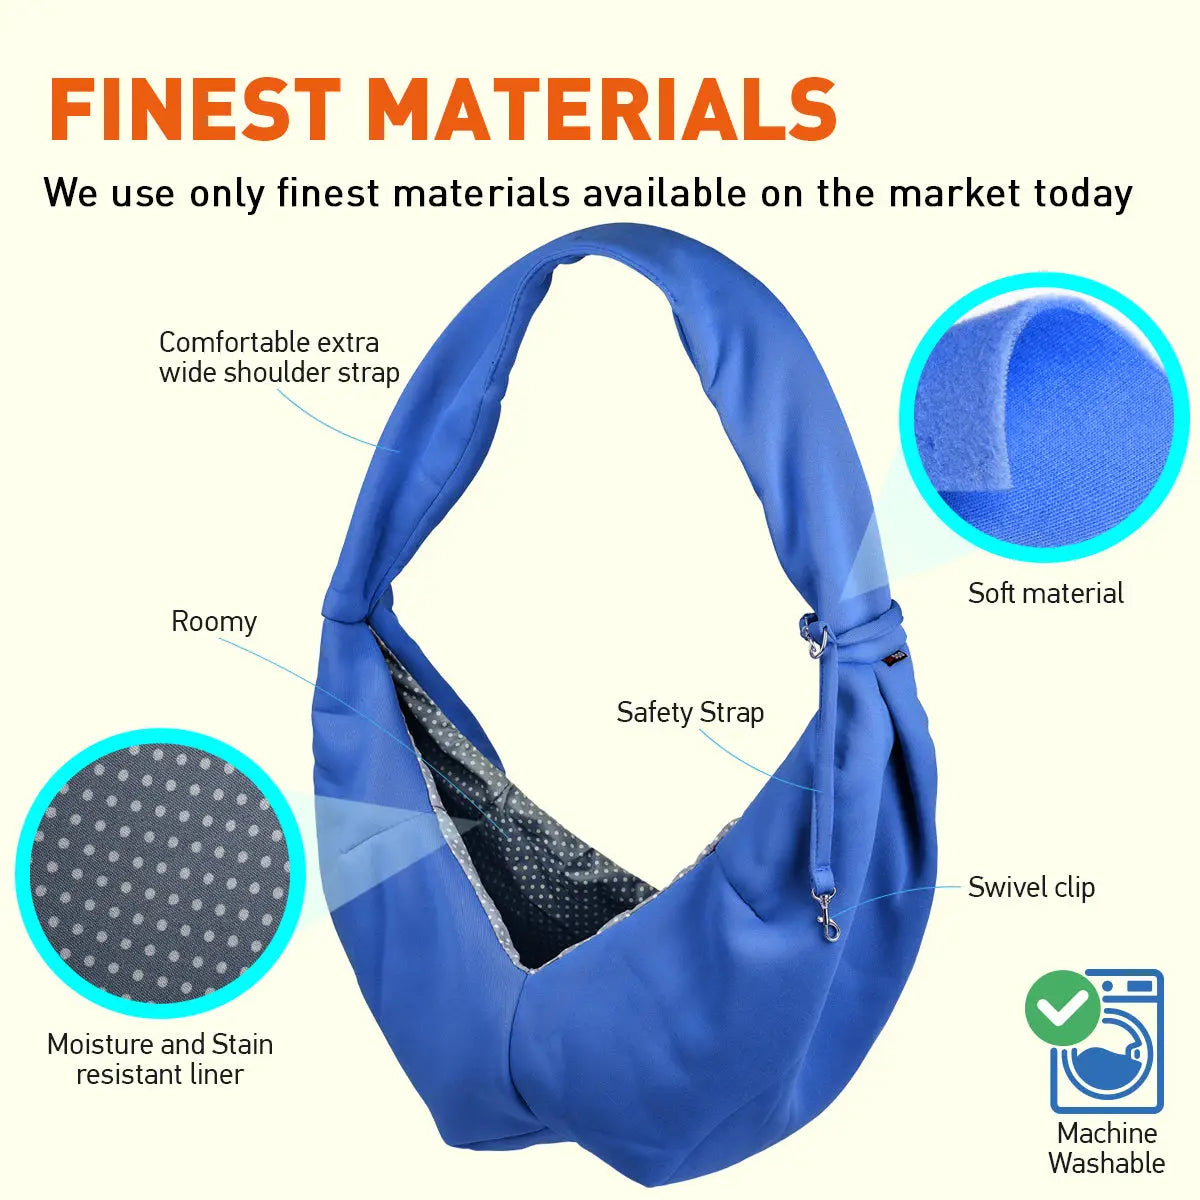 FINEST MATERIAL We use only finest materials available on the market today